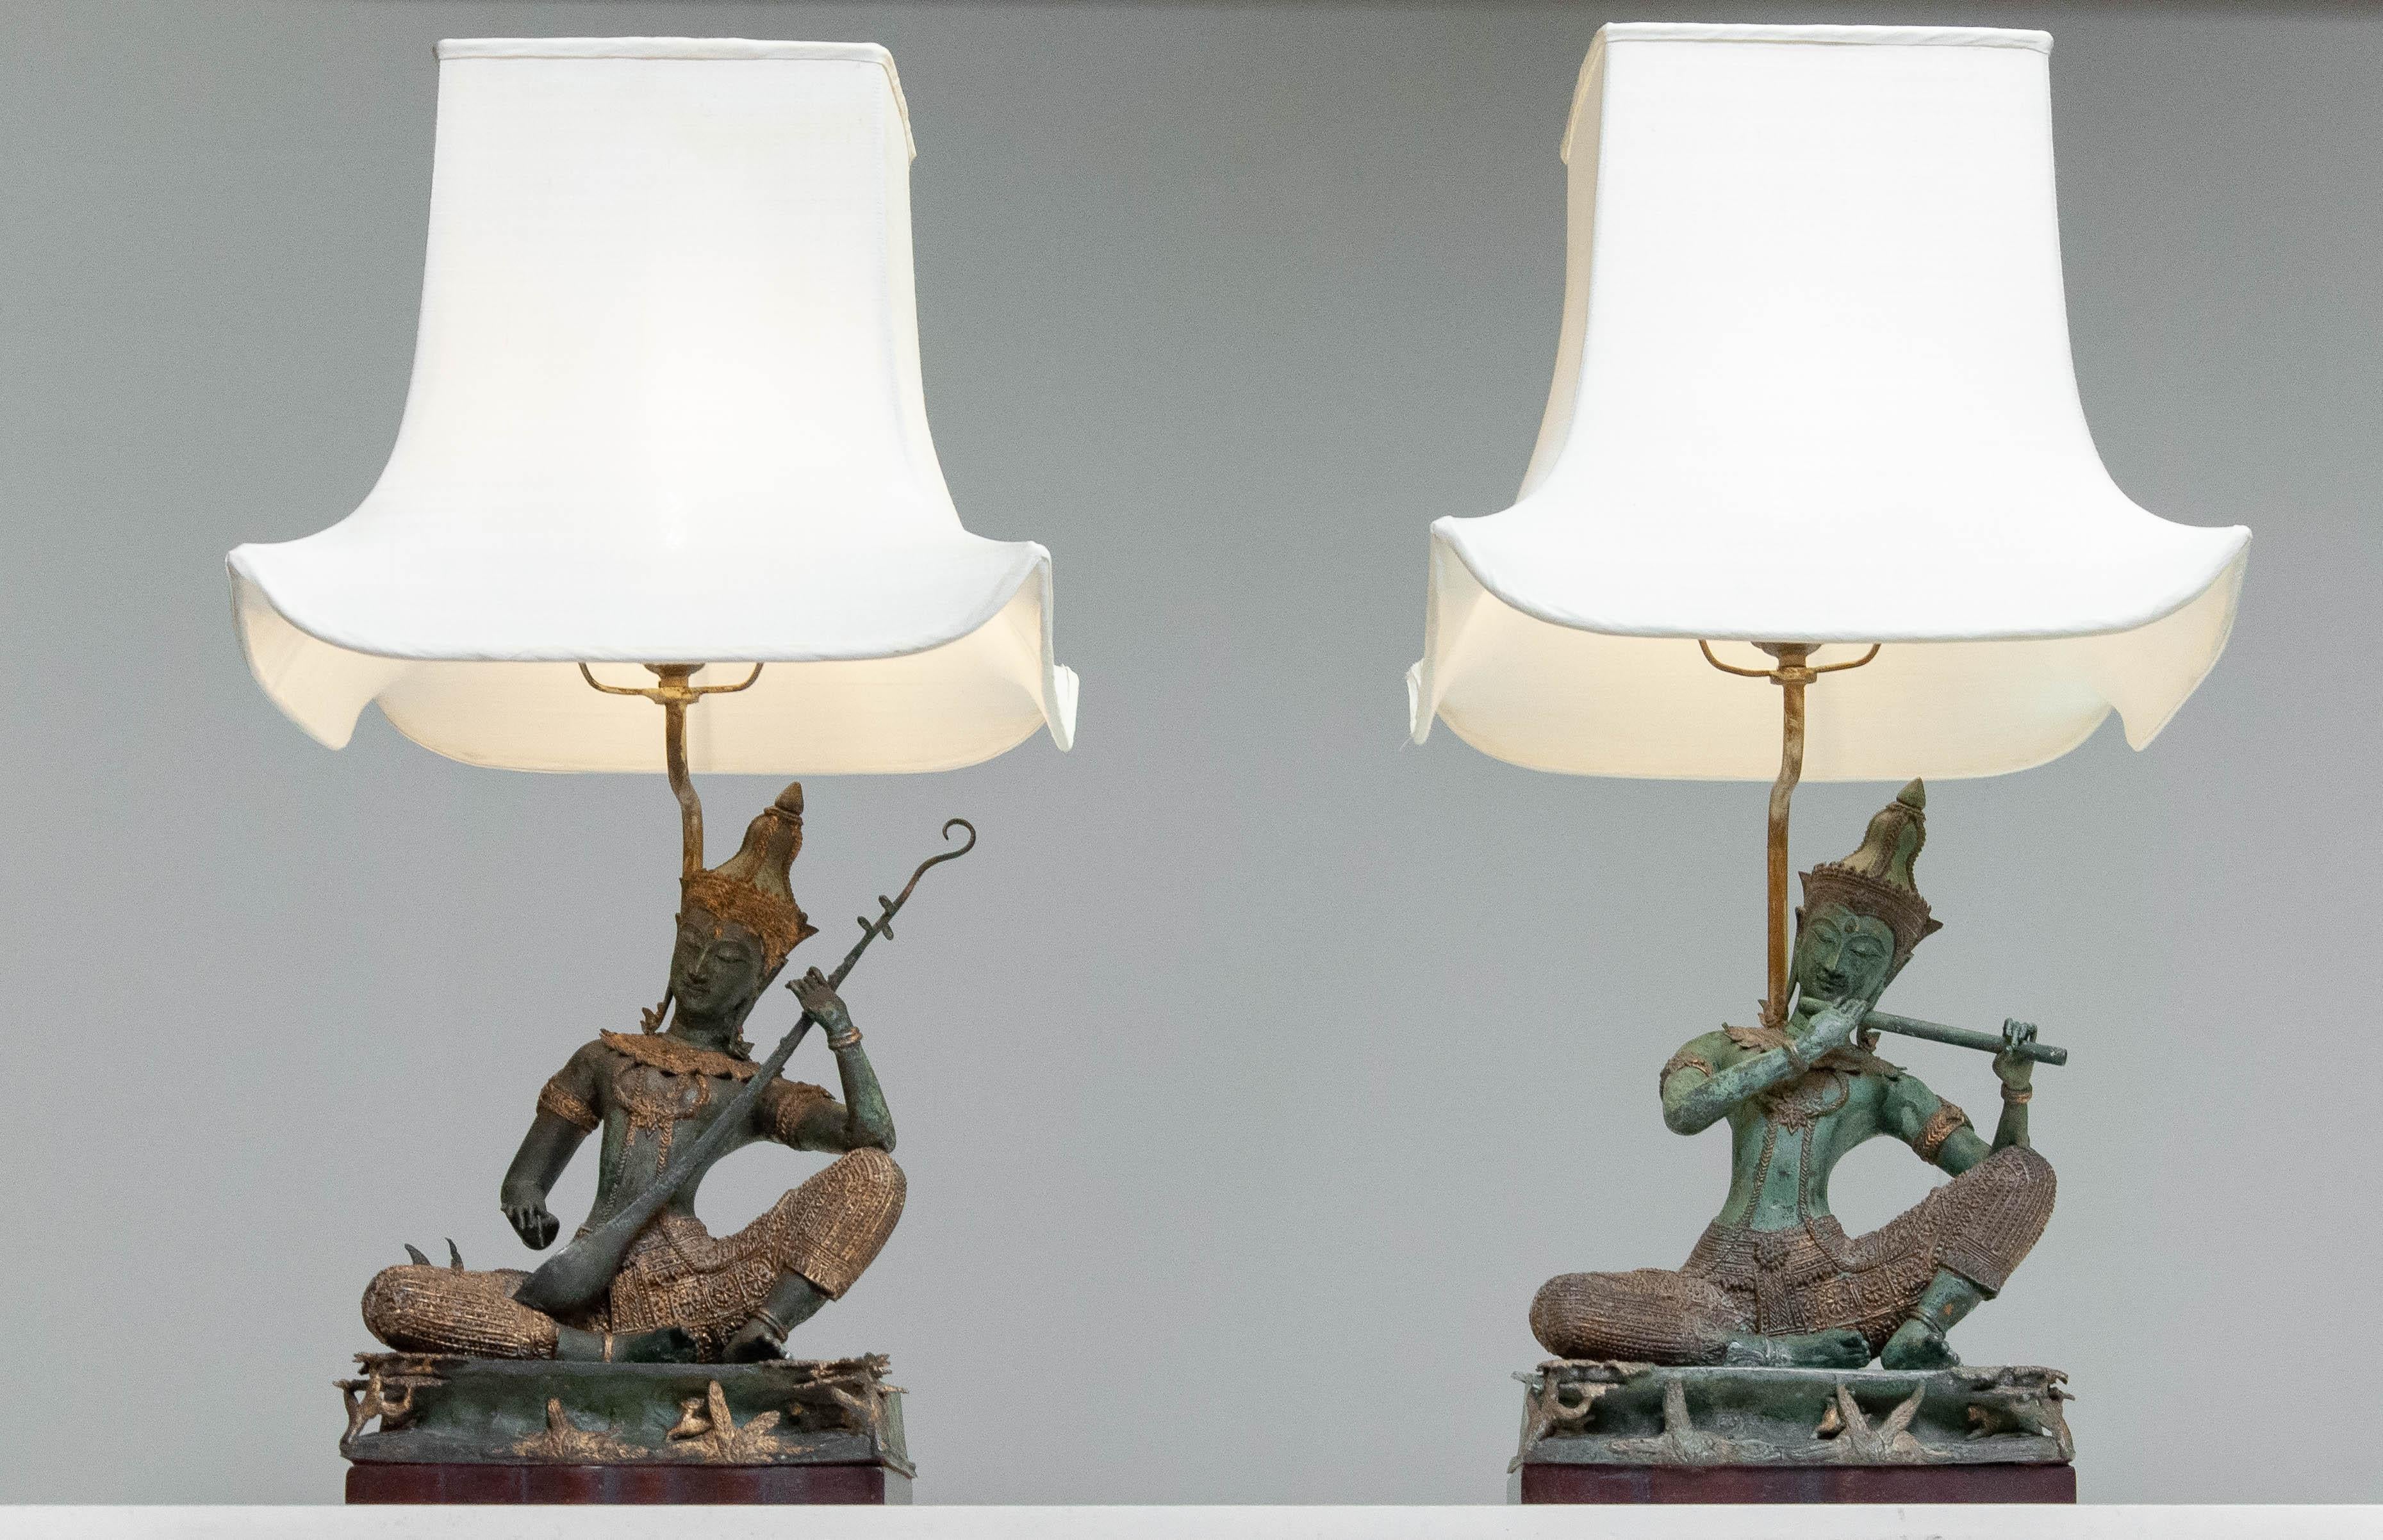 1970s Asian Vintage Table Lamps with Bronze / Gild Statues of Phra Aphai Mani For Sale 7